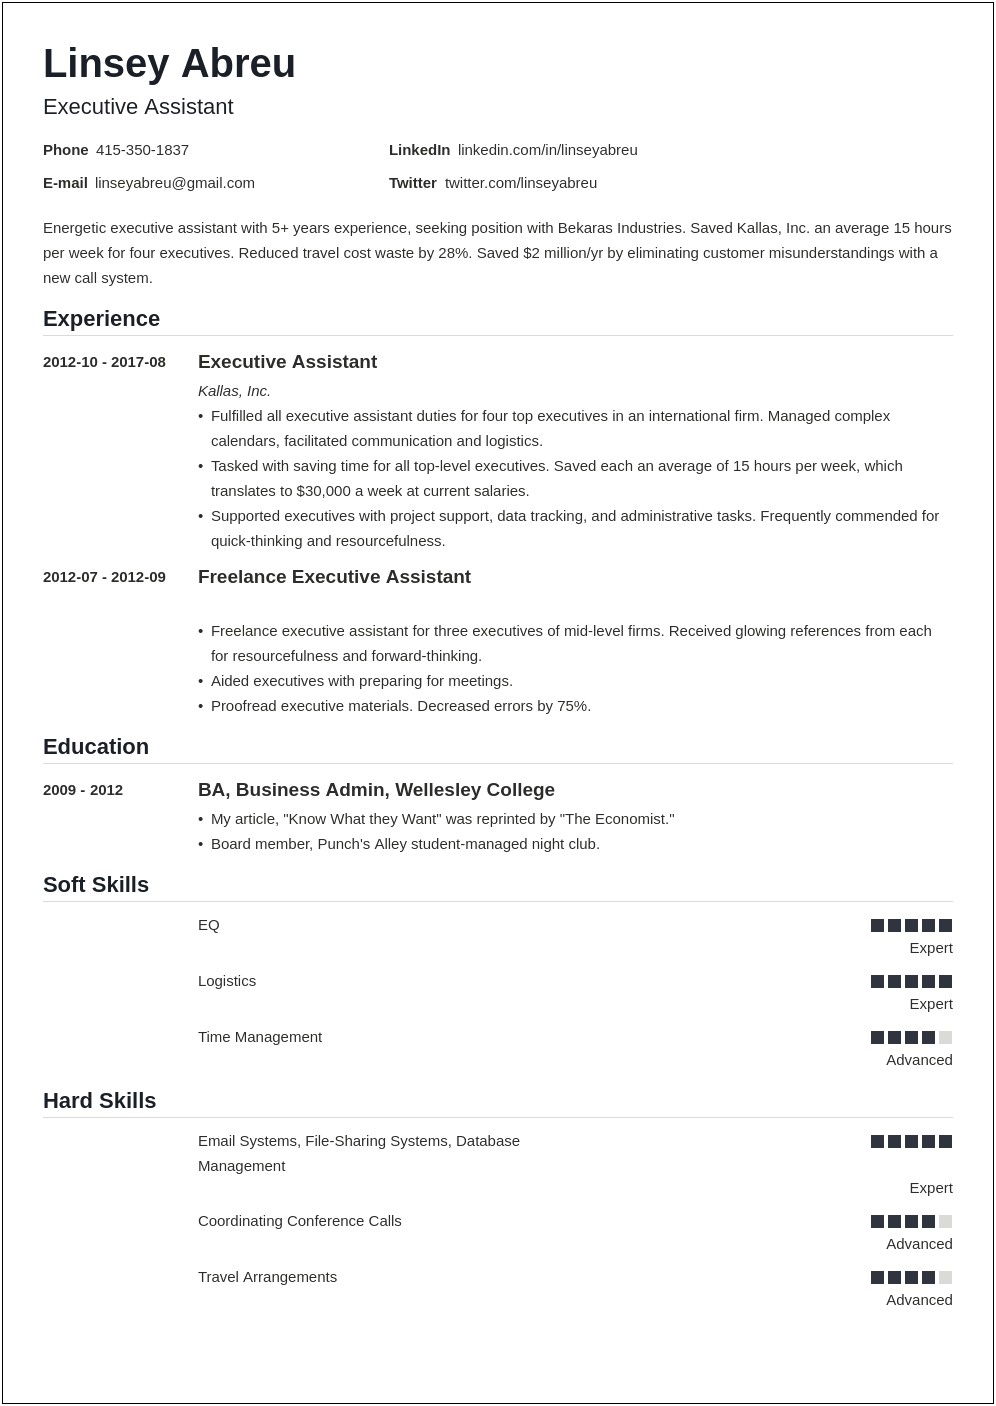 Executive Assistant Resume Skills Section